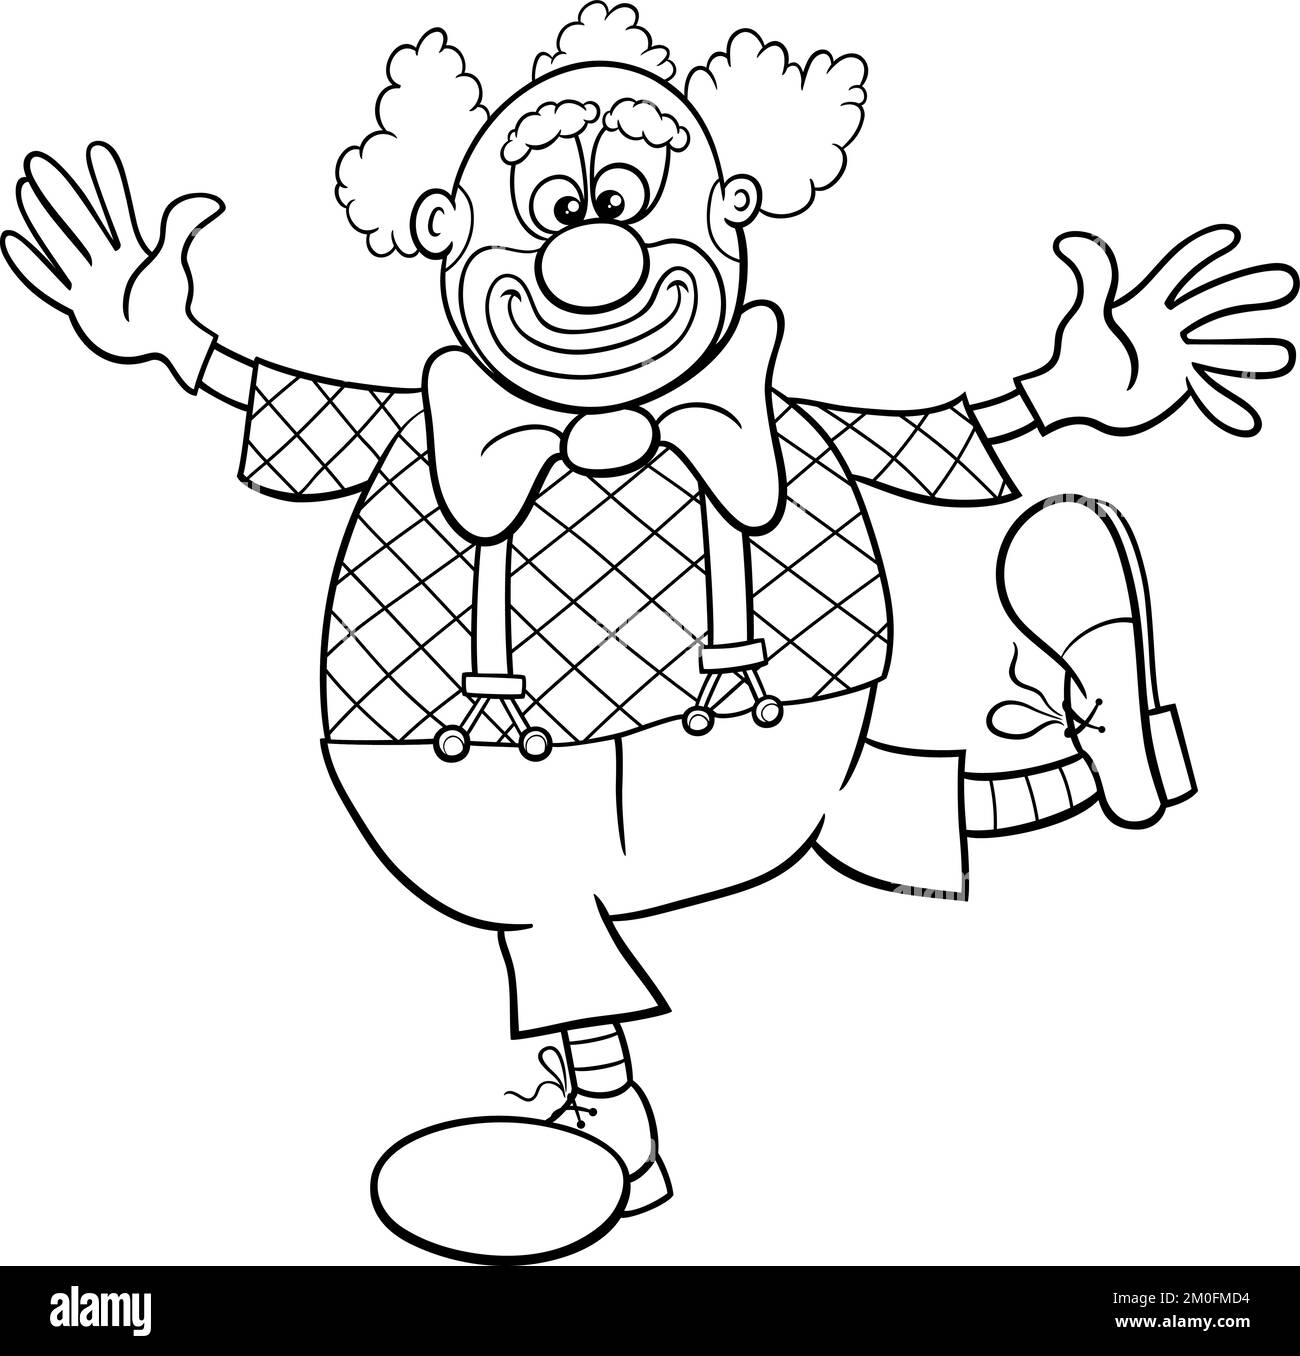 Black and white cartoon illustration of funny circus clown ic character coloring page stock vector image art